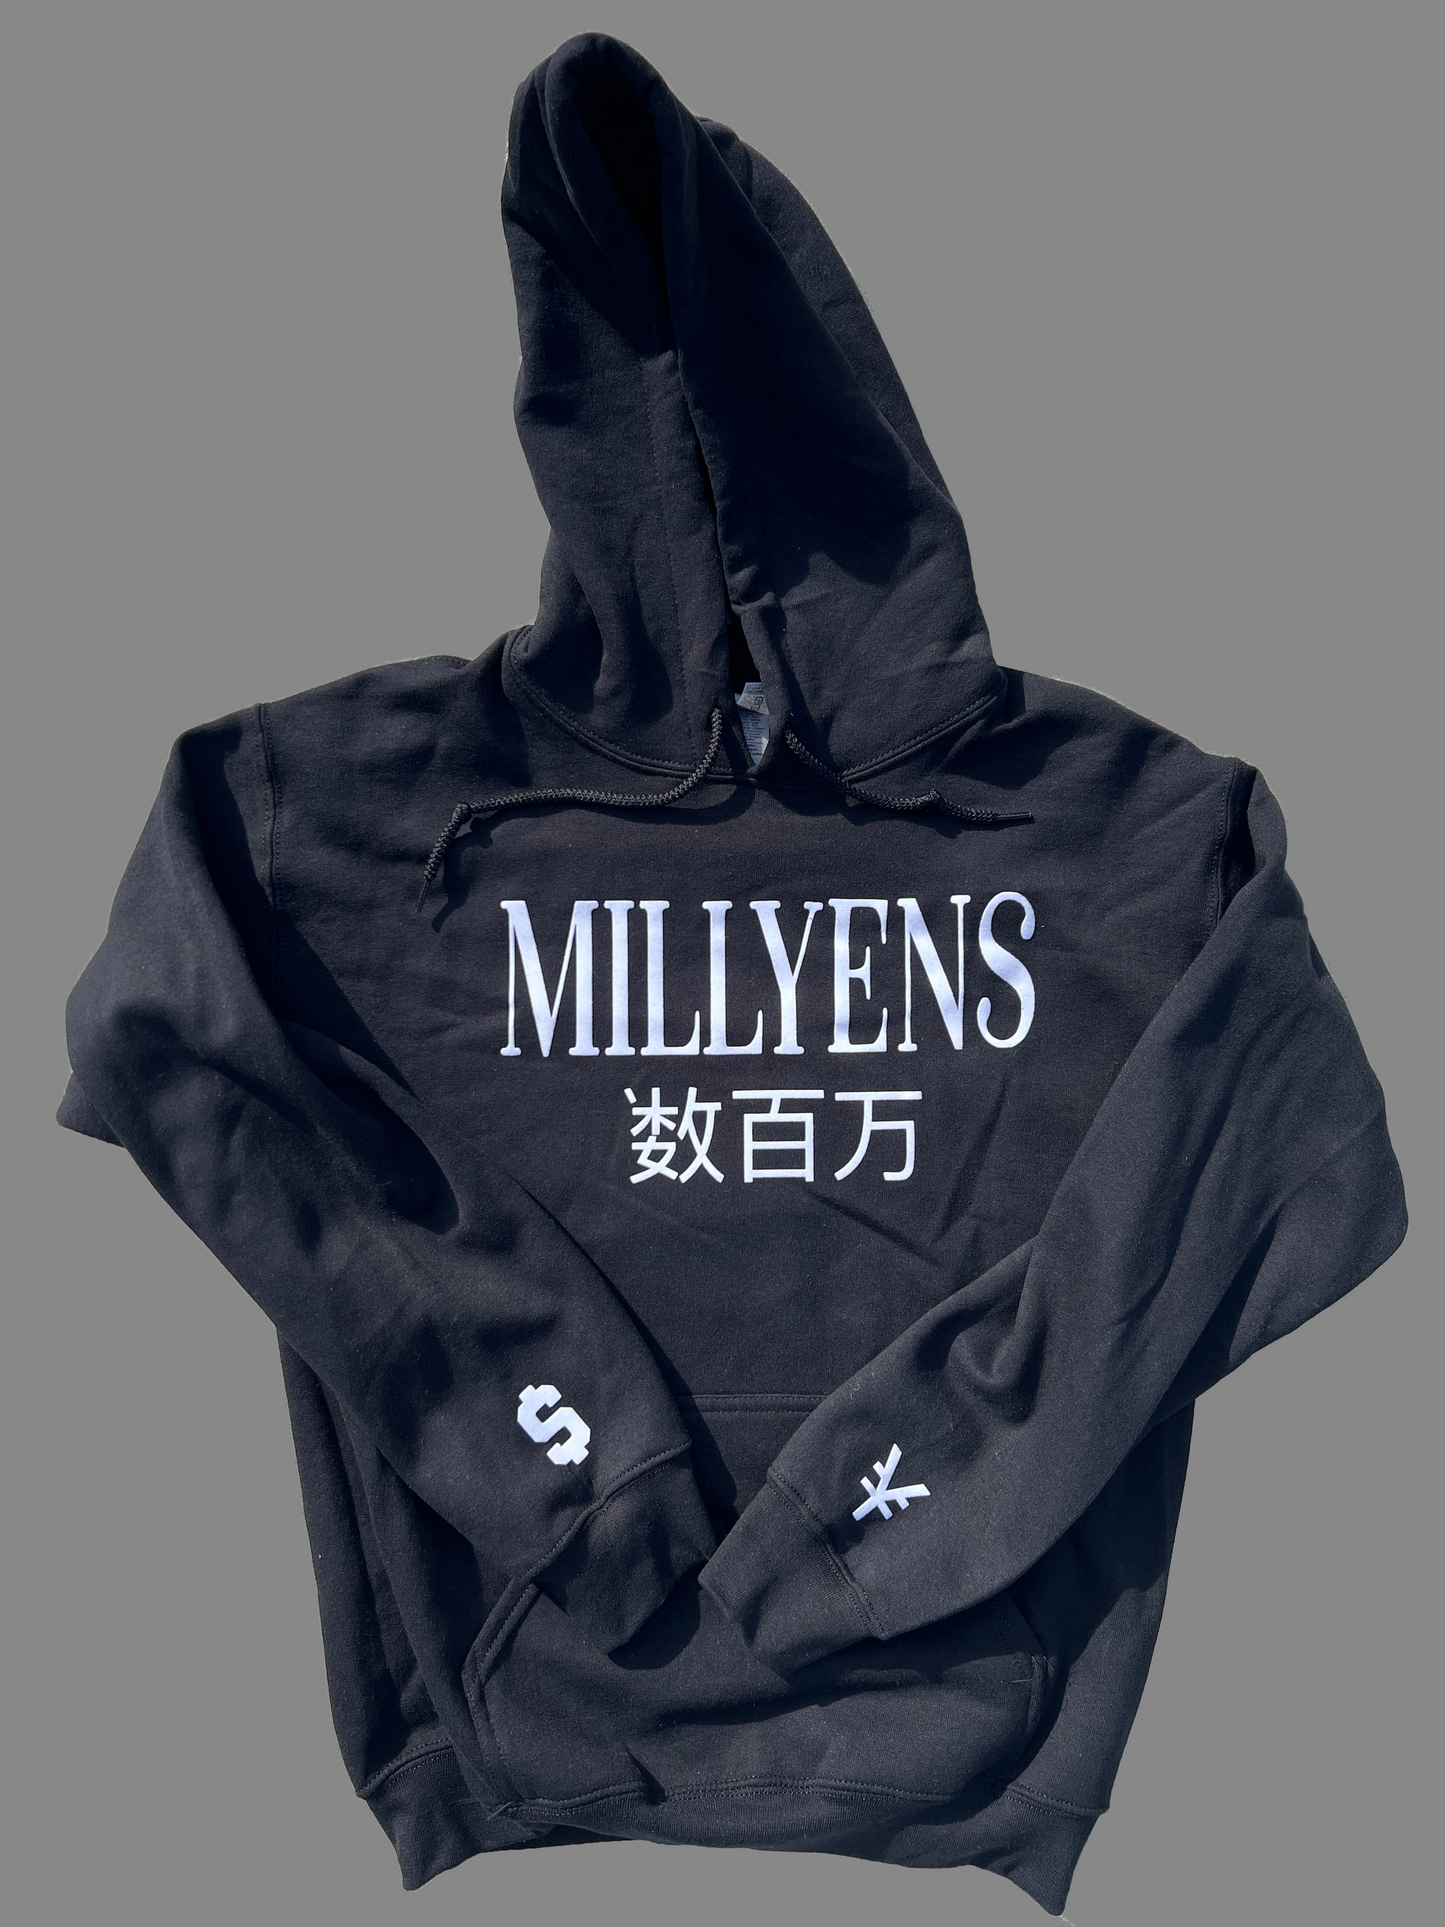 Players Only "MILLYENS" Hoodie